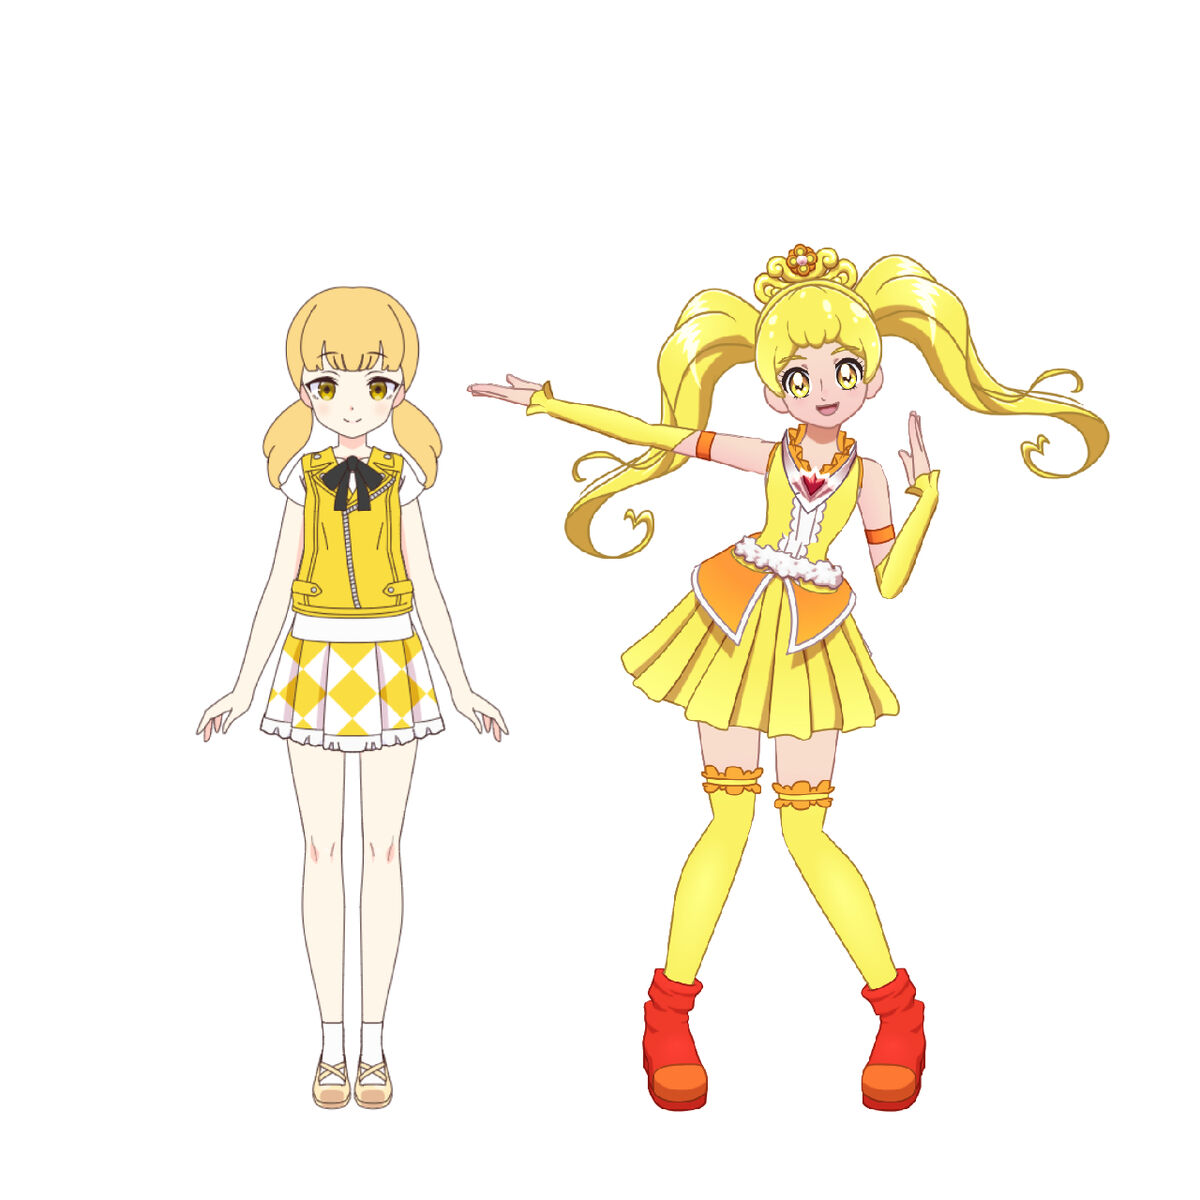 Character design of a lime green precure with yellow-orange eyes